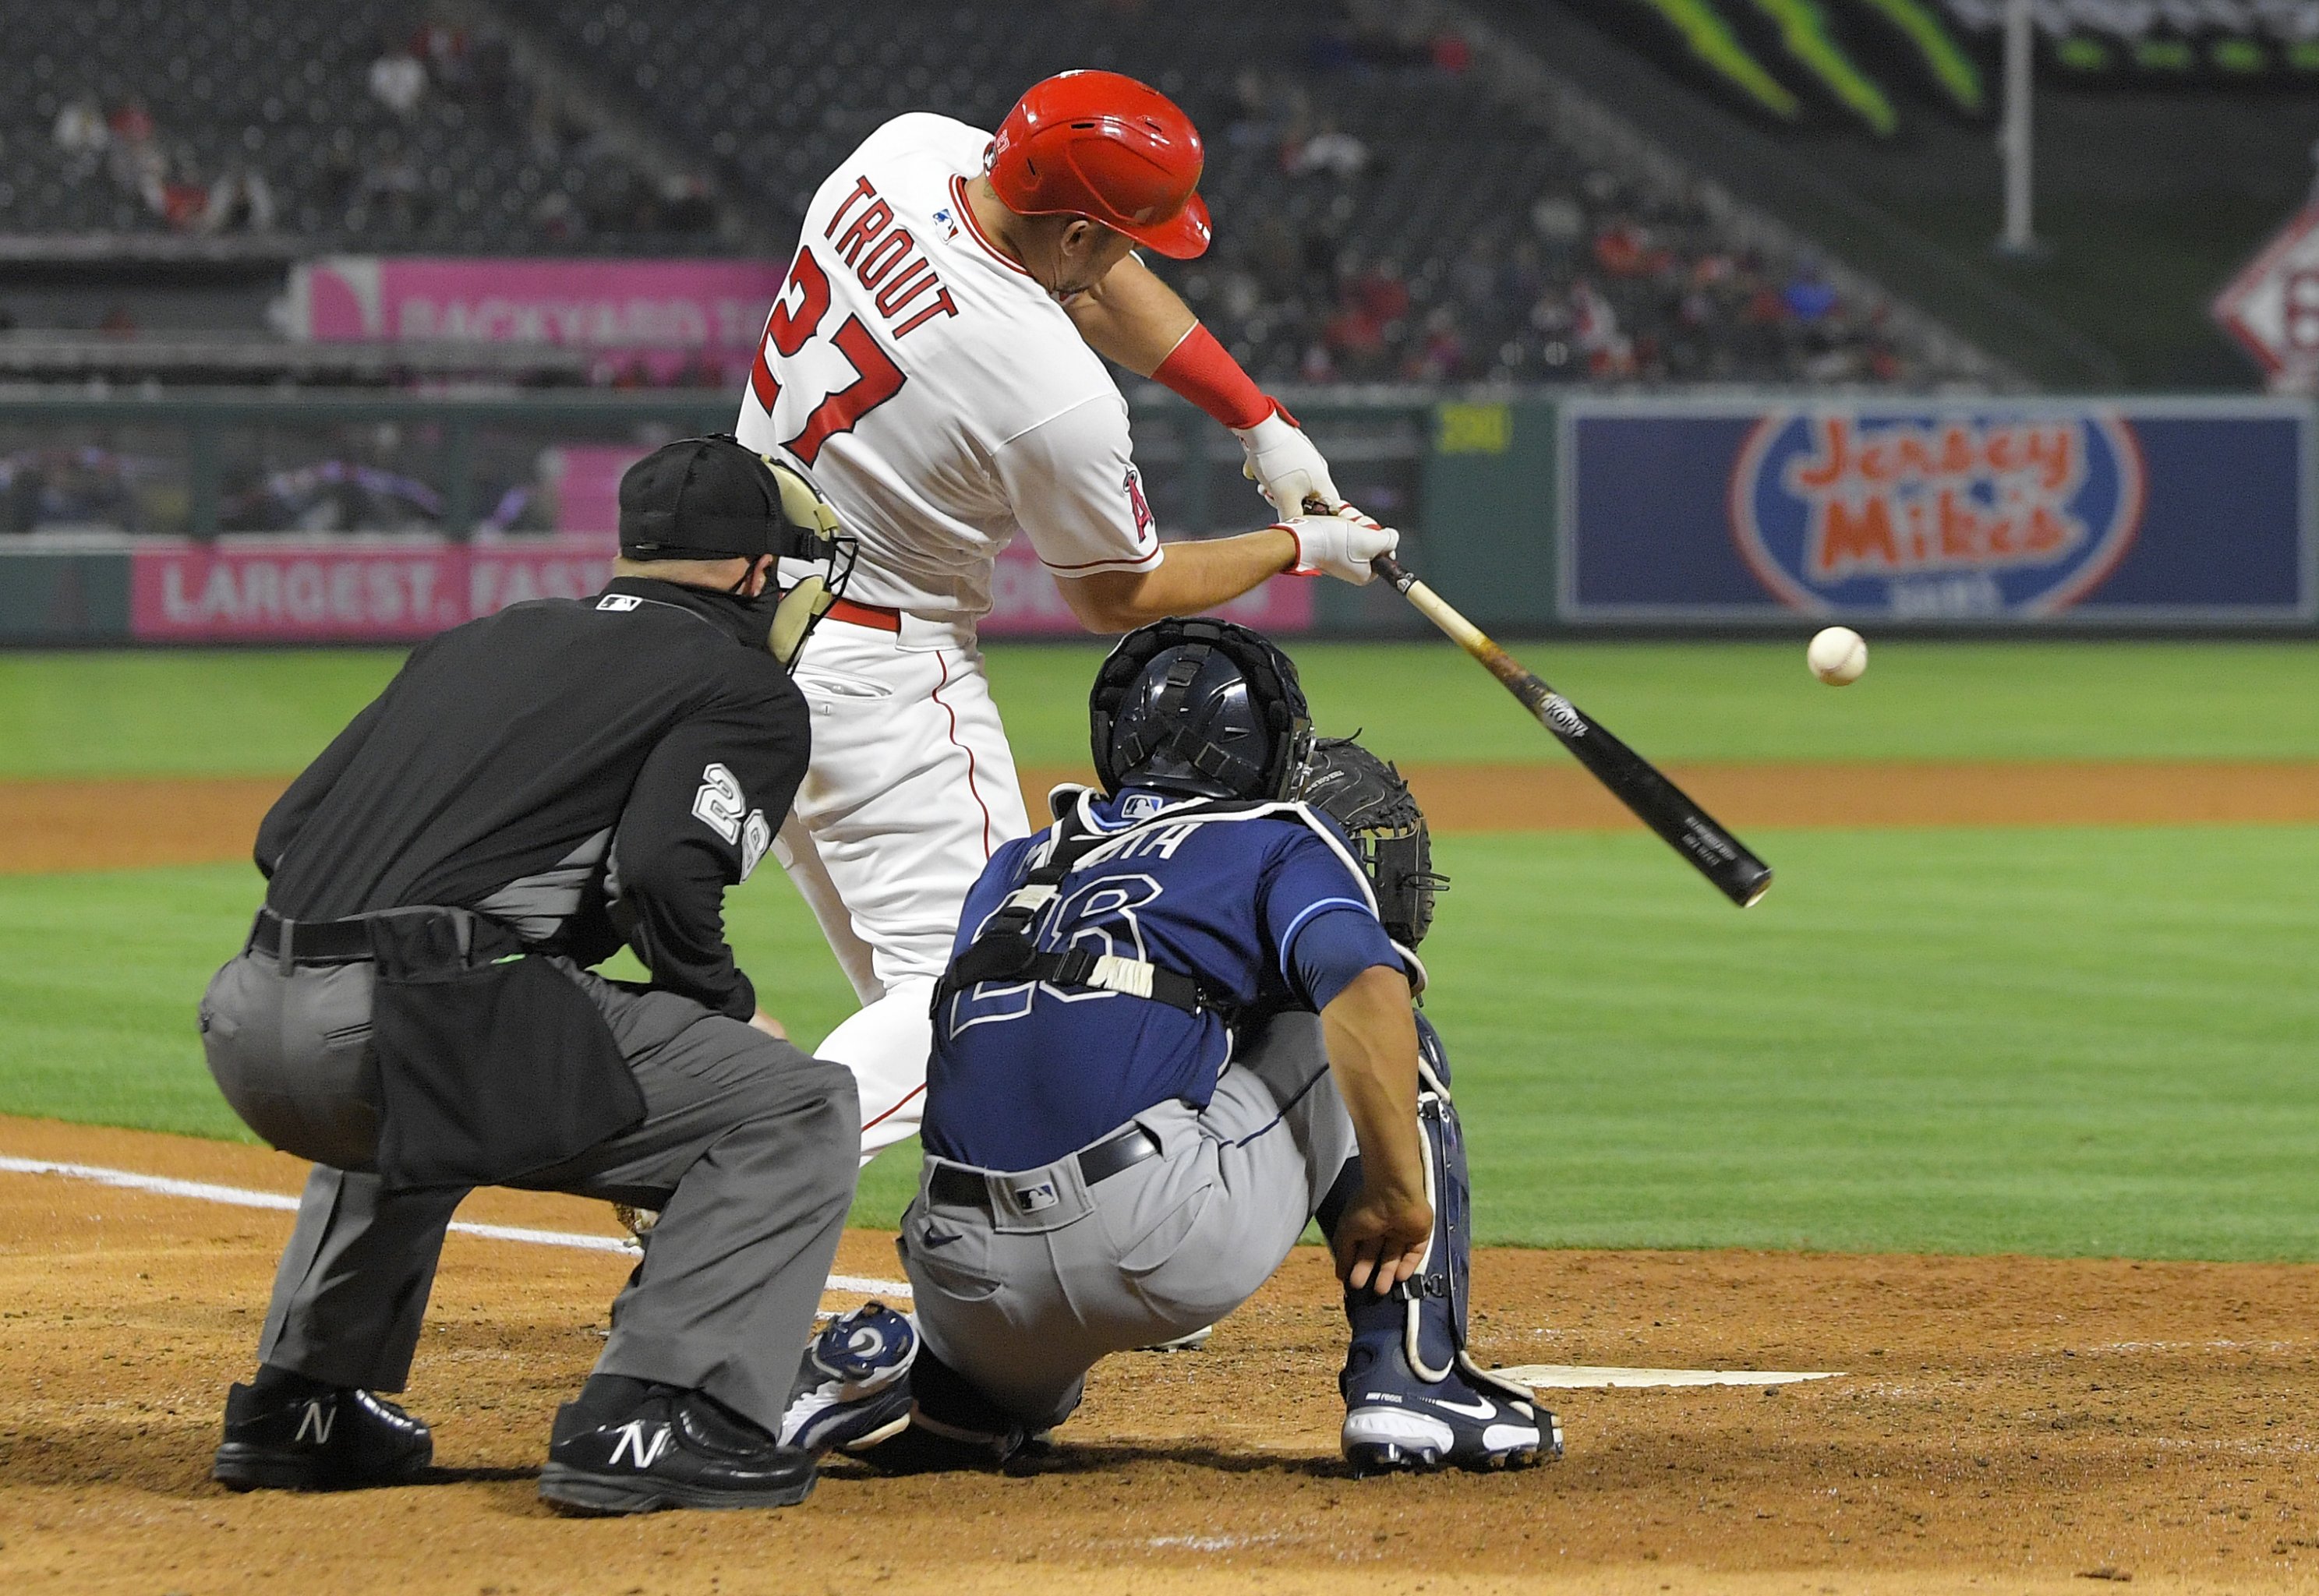 Mike Trout, Age 21 - MLB Age Gallery: A Look at Four Major